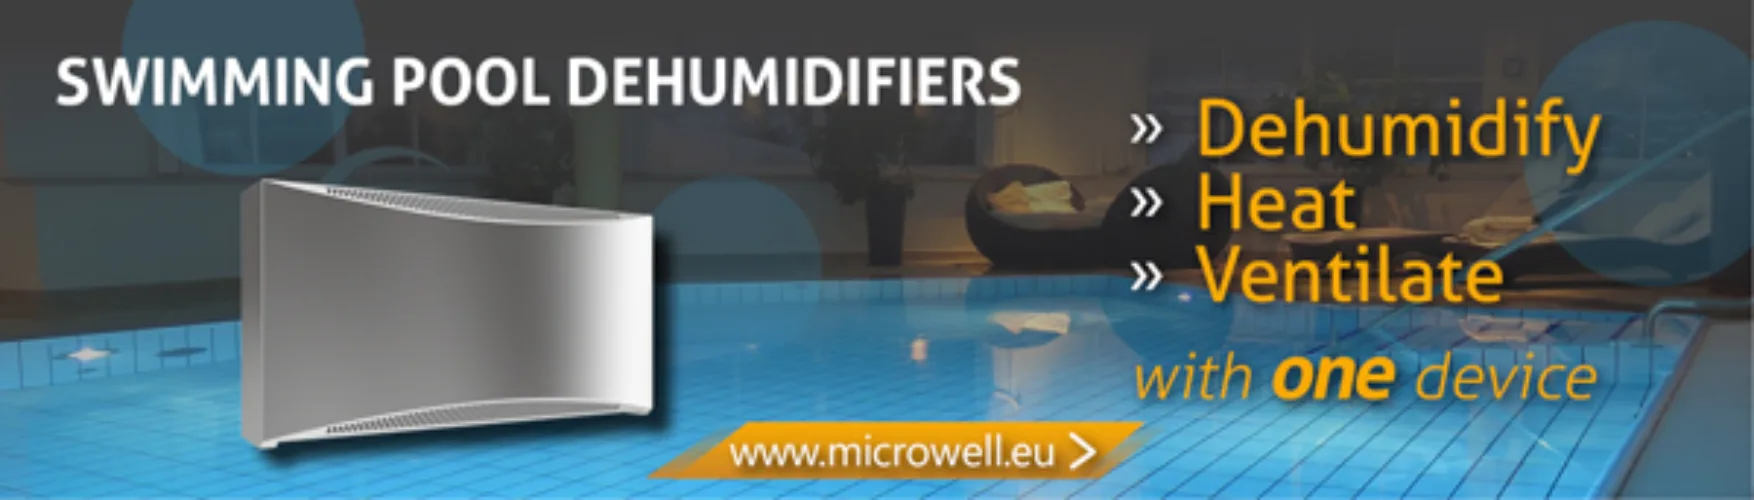 Dehumidification, ventilation and heating with one device